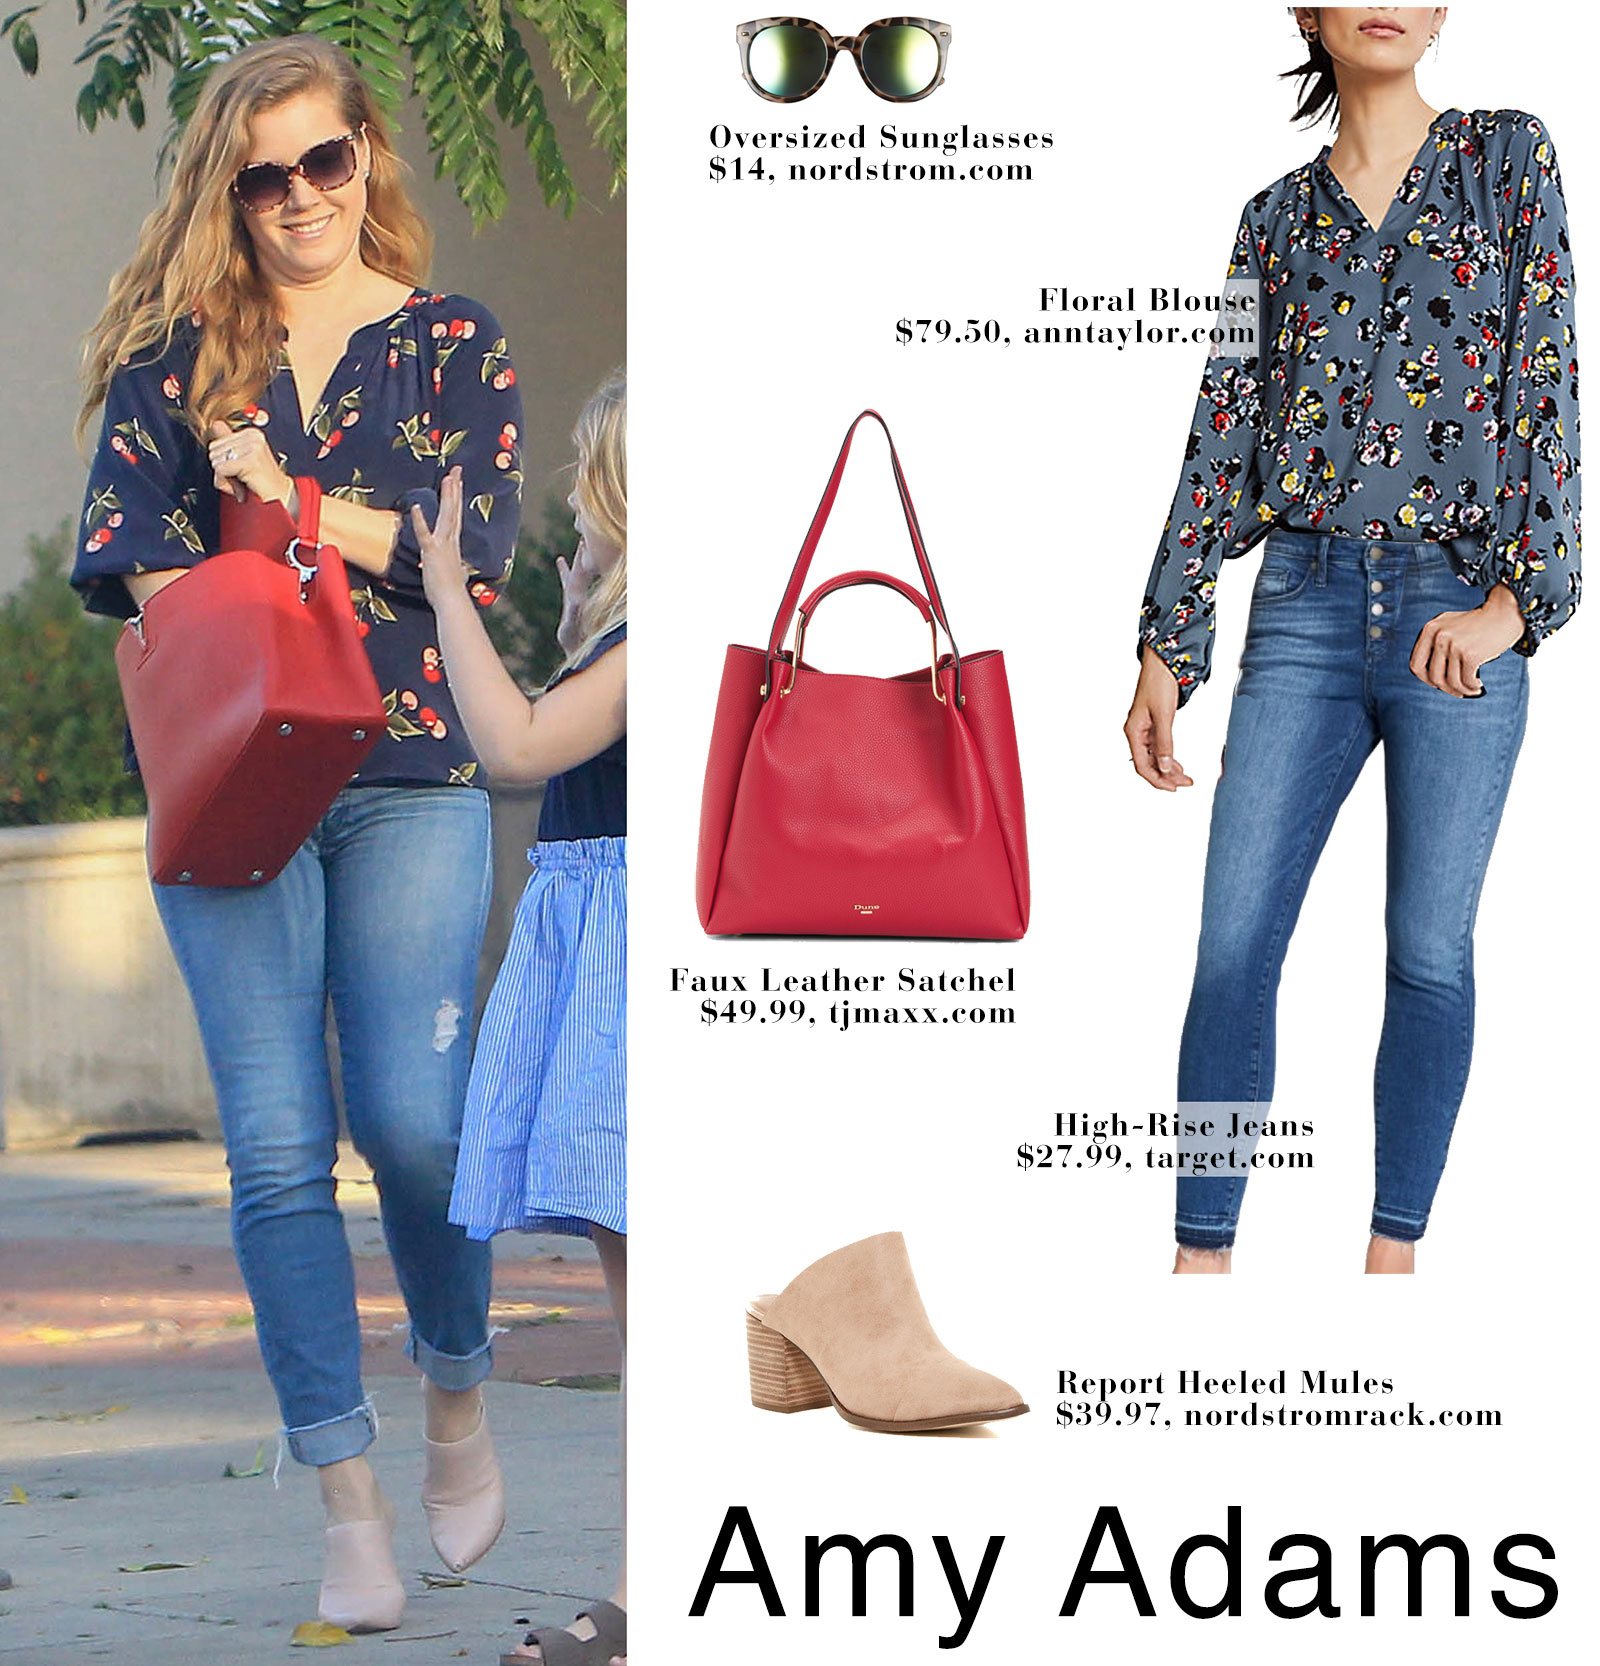 Amy Adams' wears a Joie cherry print blouse with jeans and nude mule heels.